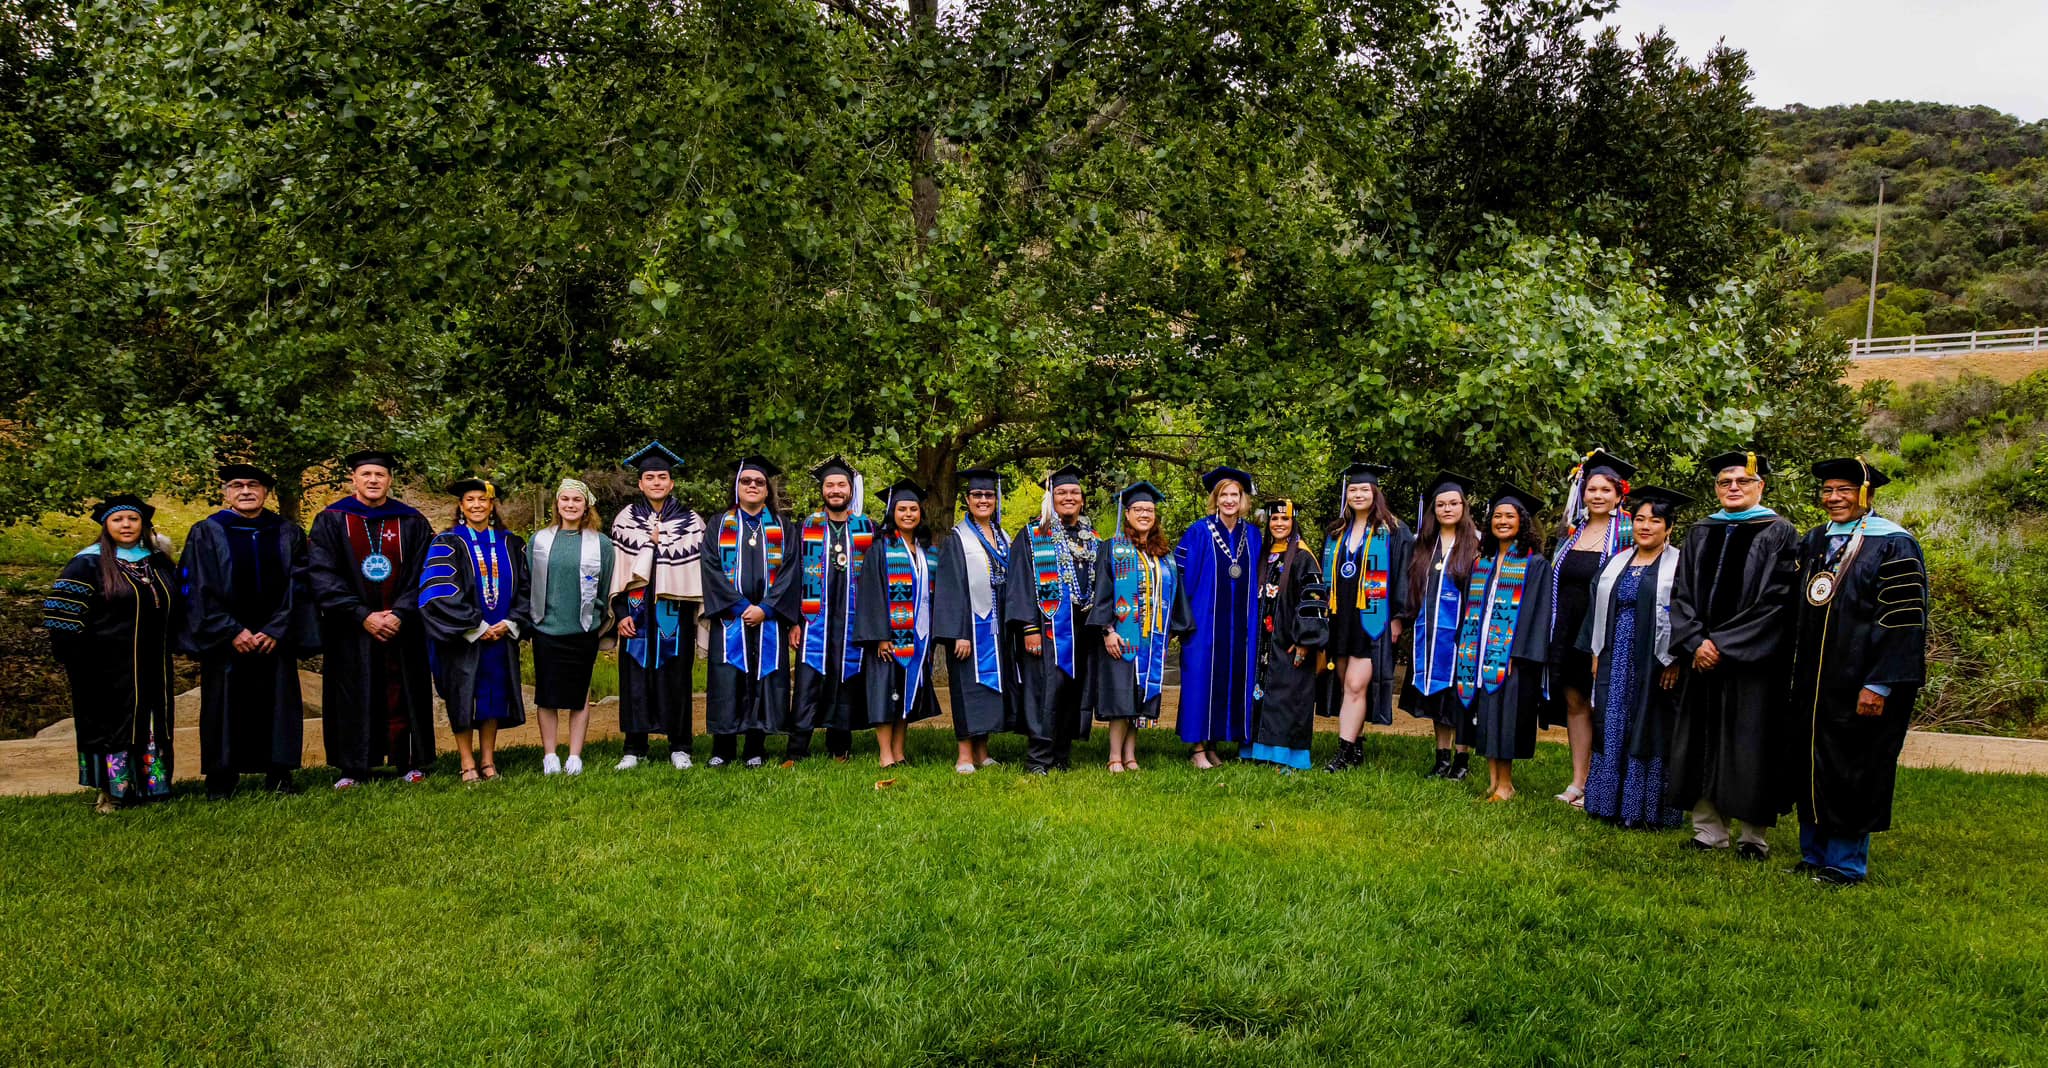 Graduates and faculty and staff in their caps, gowns, and stoles, standing in a horizontal line in the grass in front of a large green tree.